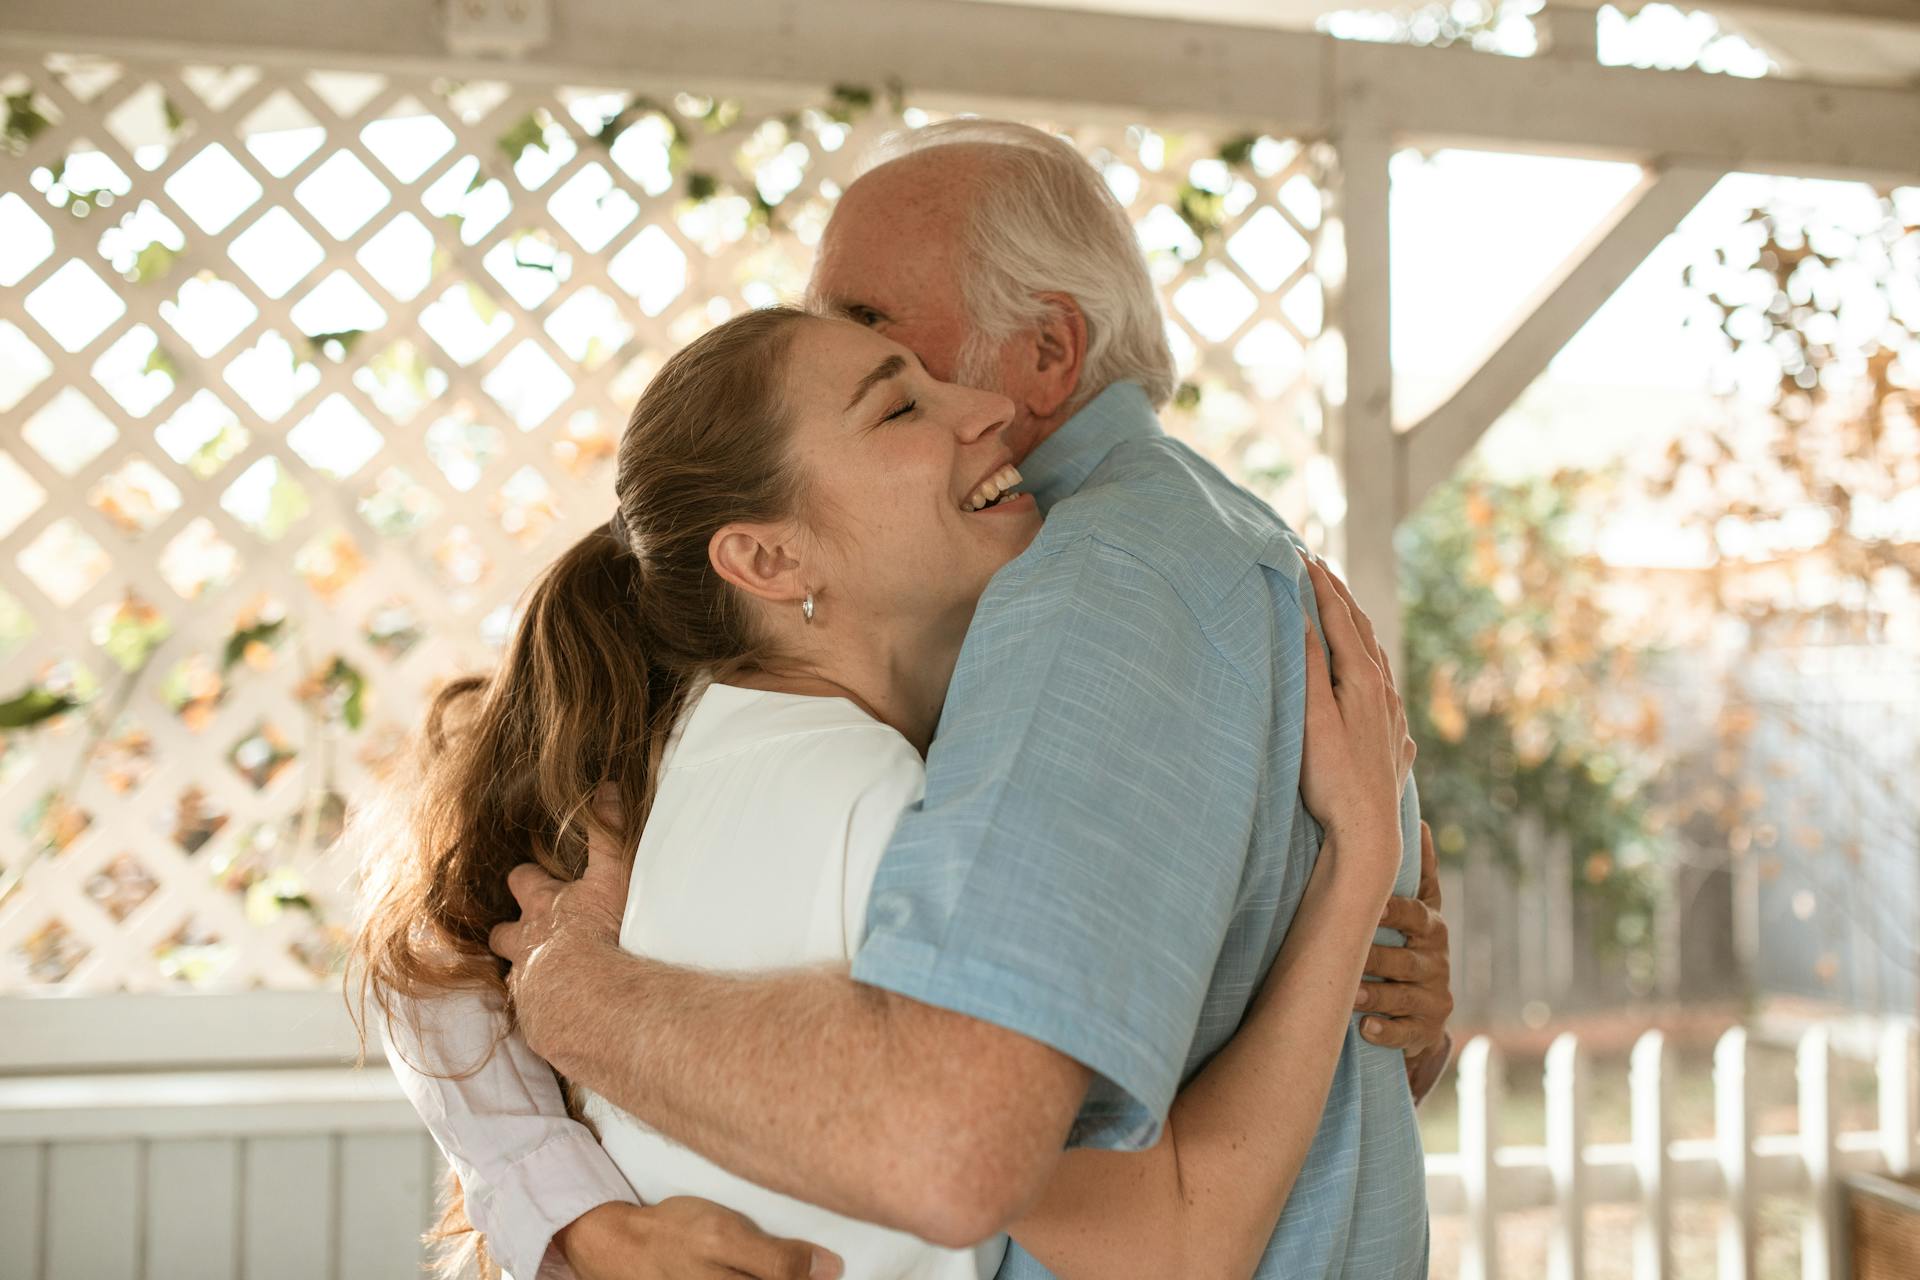 A father and daughter hug | Source: Pexels